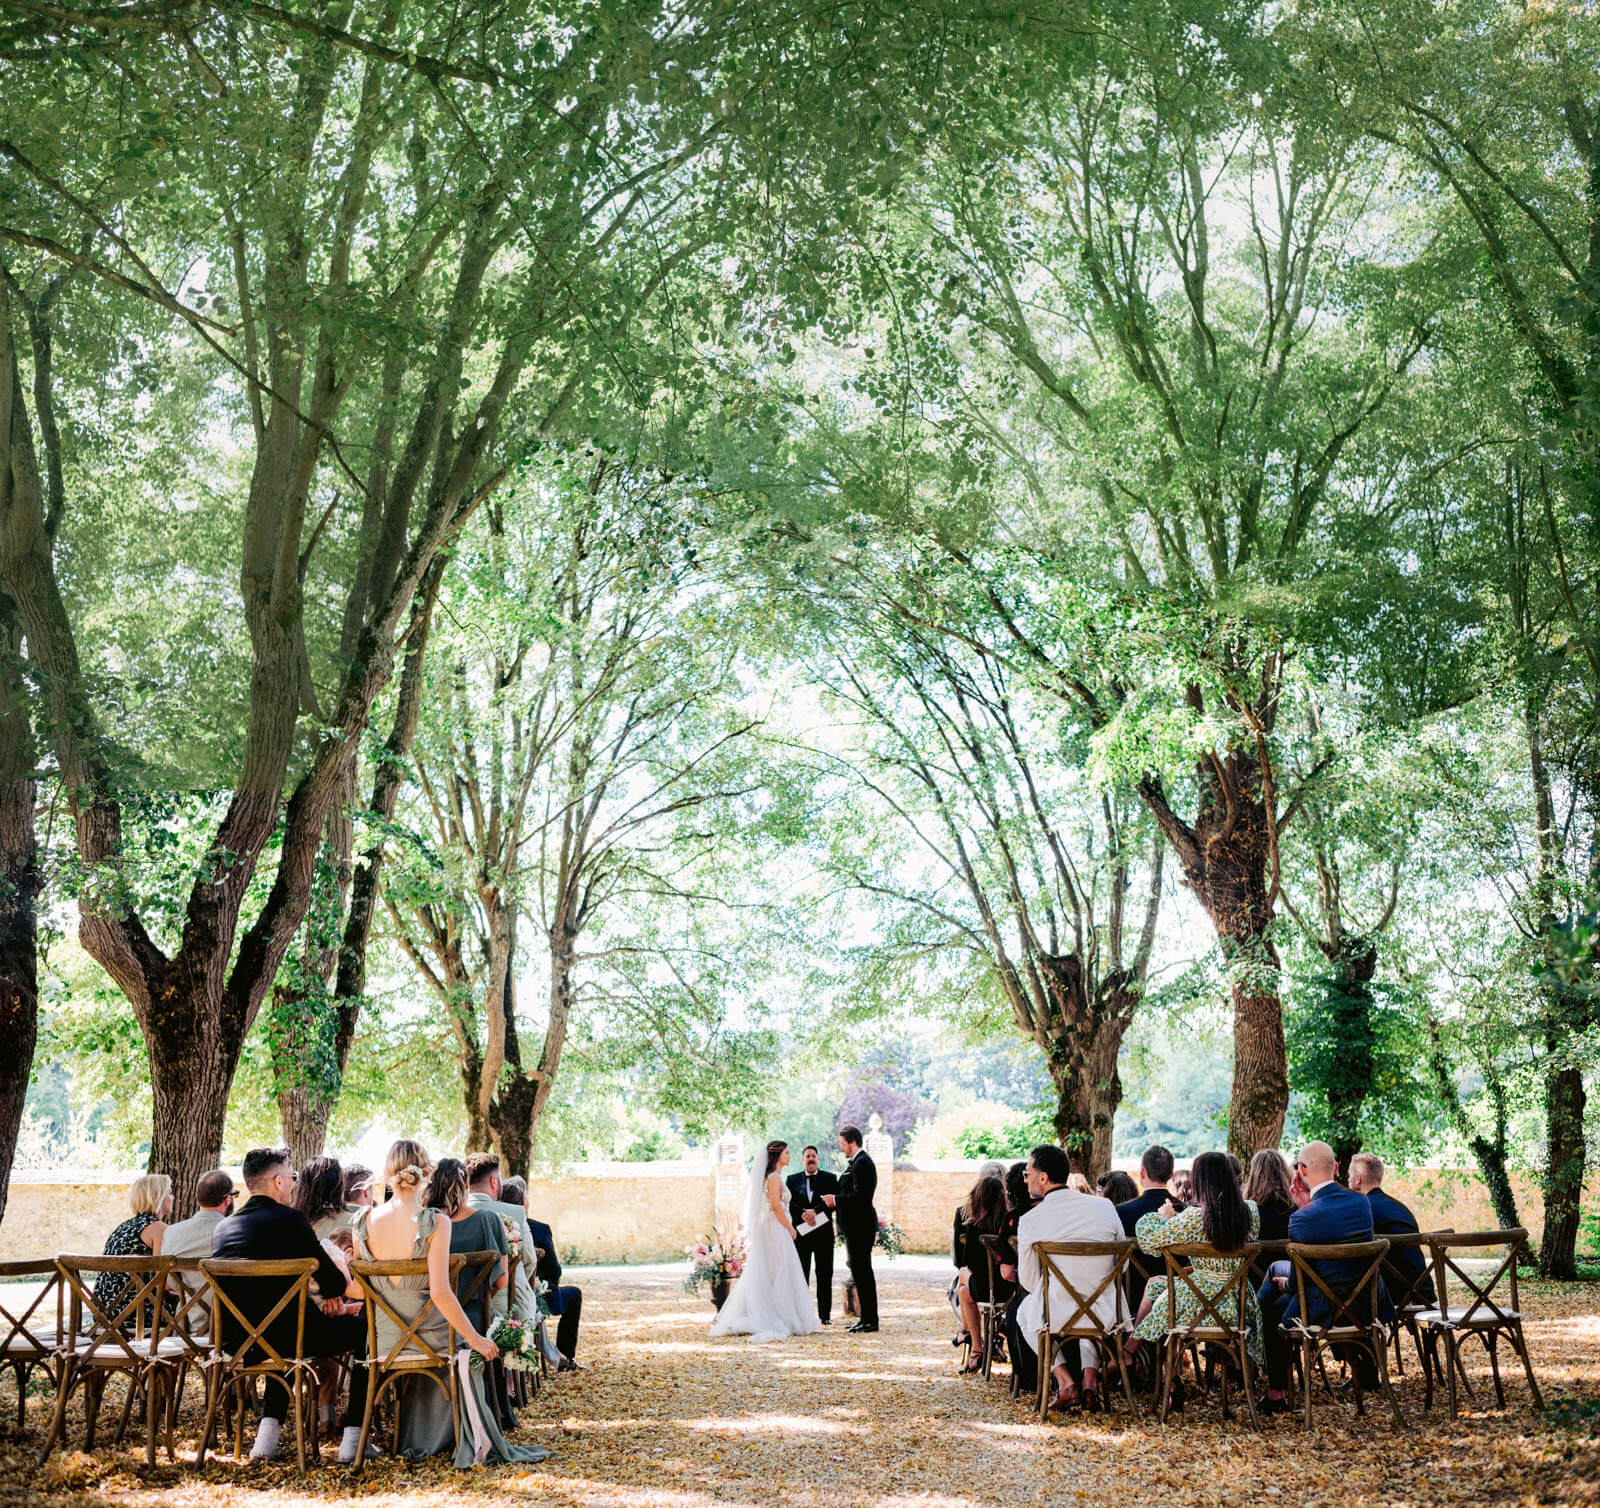 A beautiful, rustic, wedding ceremony amidst tall trees. Outdoor wedding destination image by Jenny Fu Studio